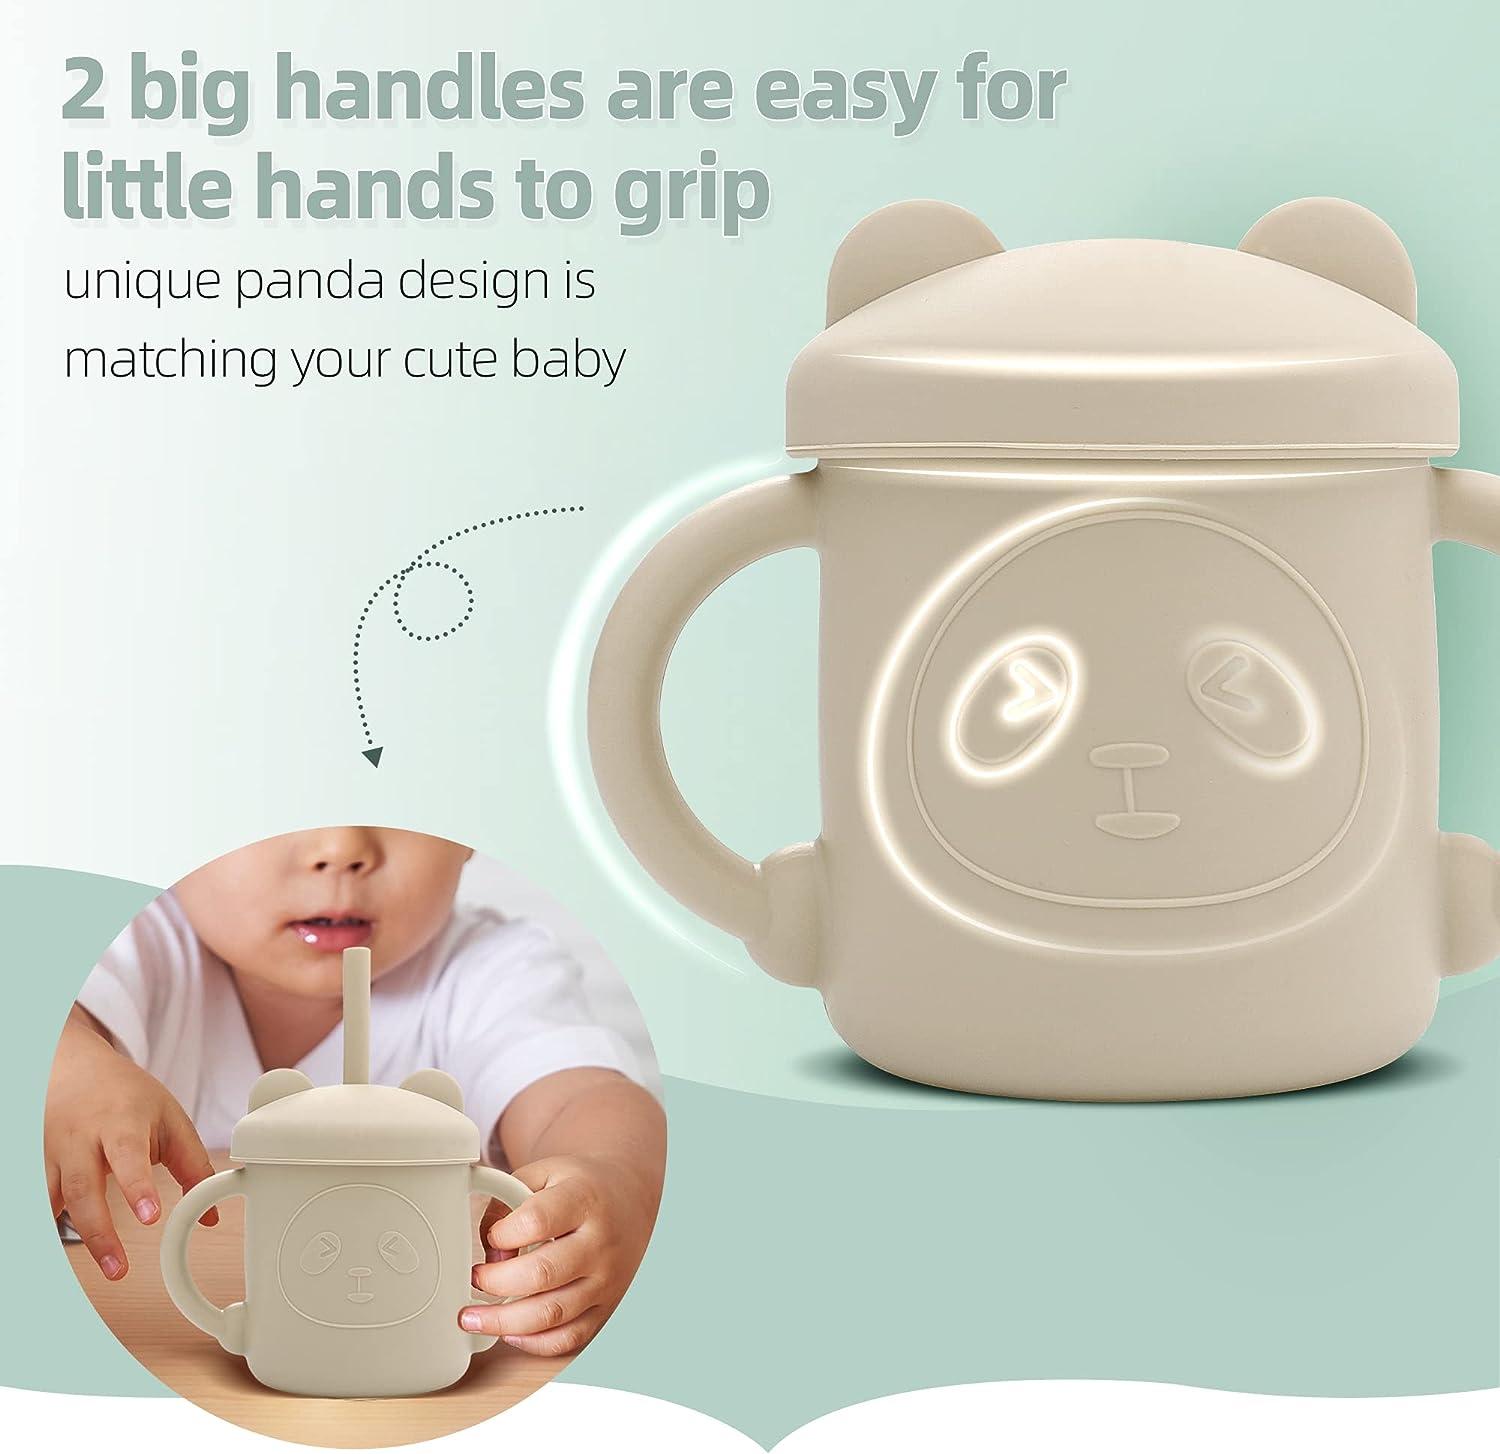 Protoiya Baby Straw Cup, Toddler Cups, Silicone Training Cup for Infants 2 Handles, Toddler Learning Cup Baby Drinking Open Cups Easy Grip Handles